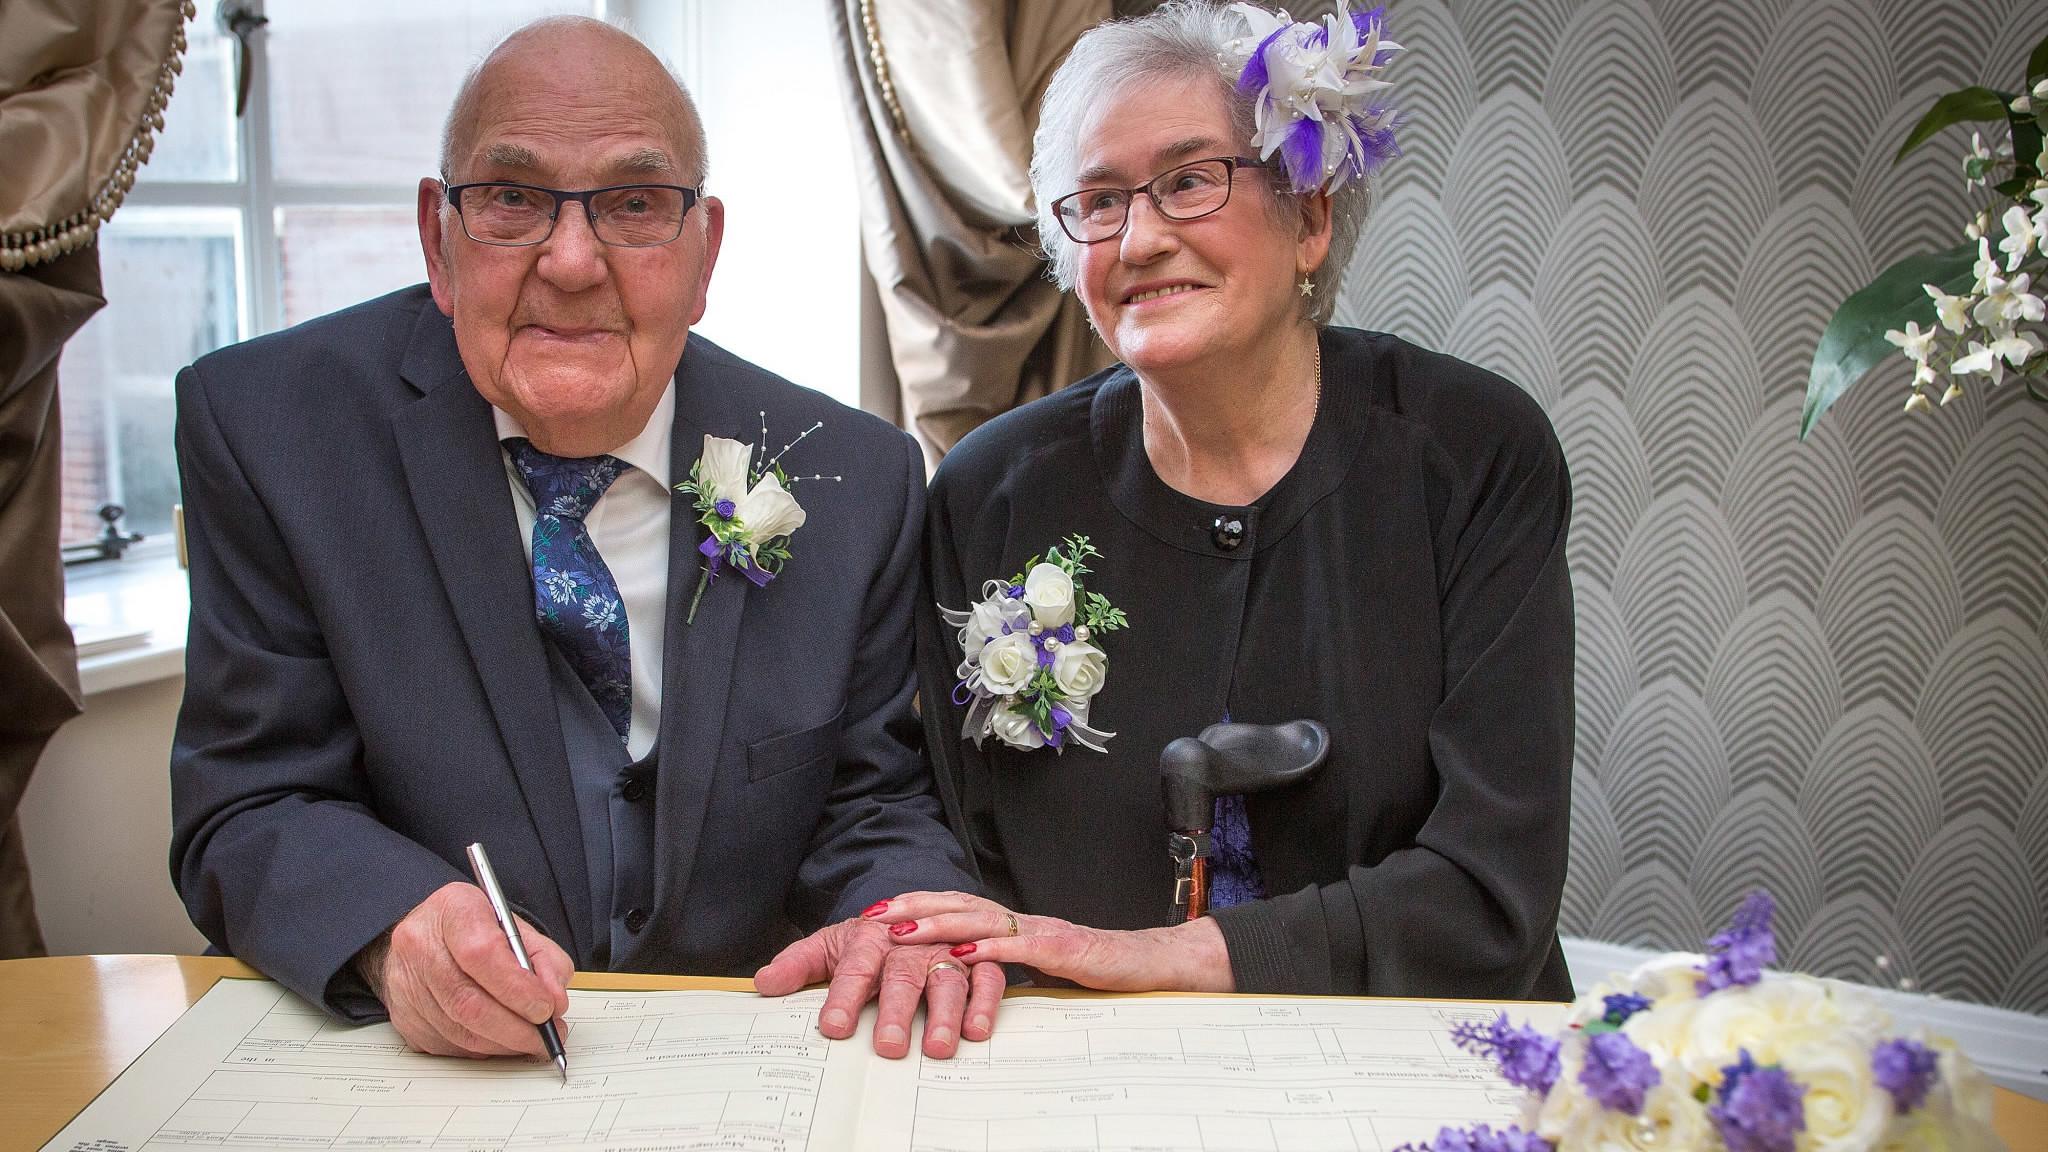 British couple with combined age of 171 get married